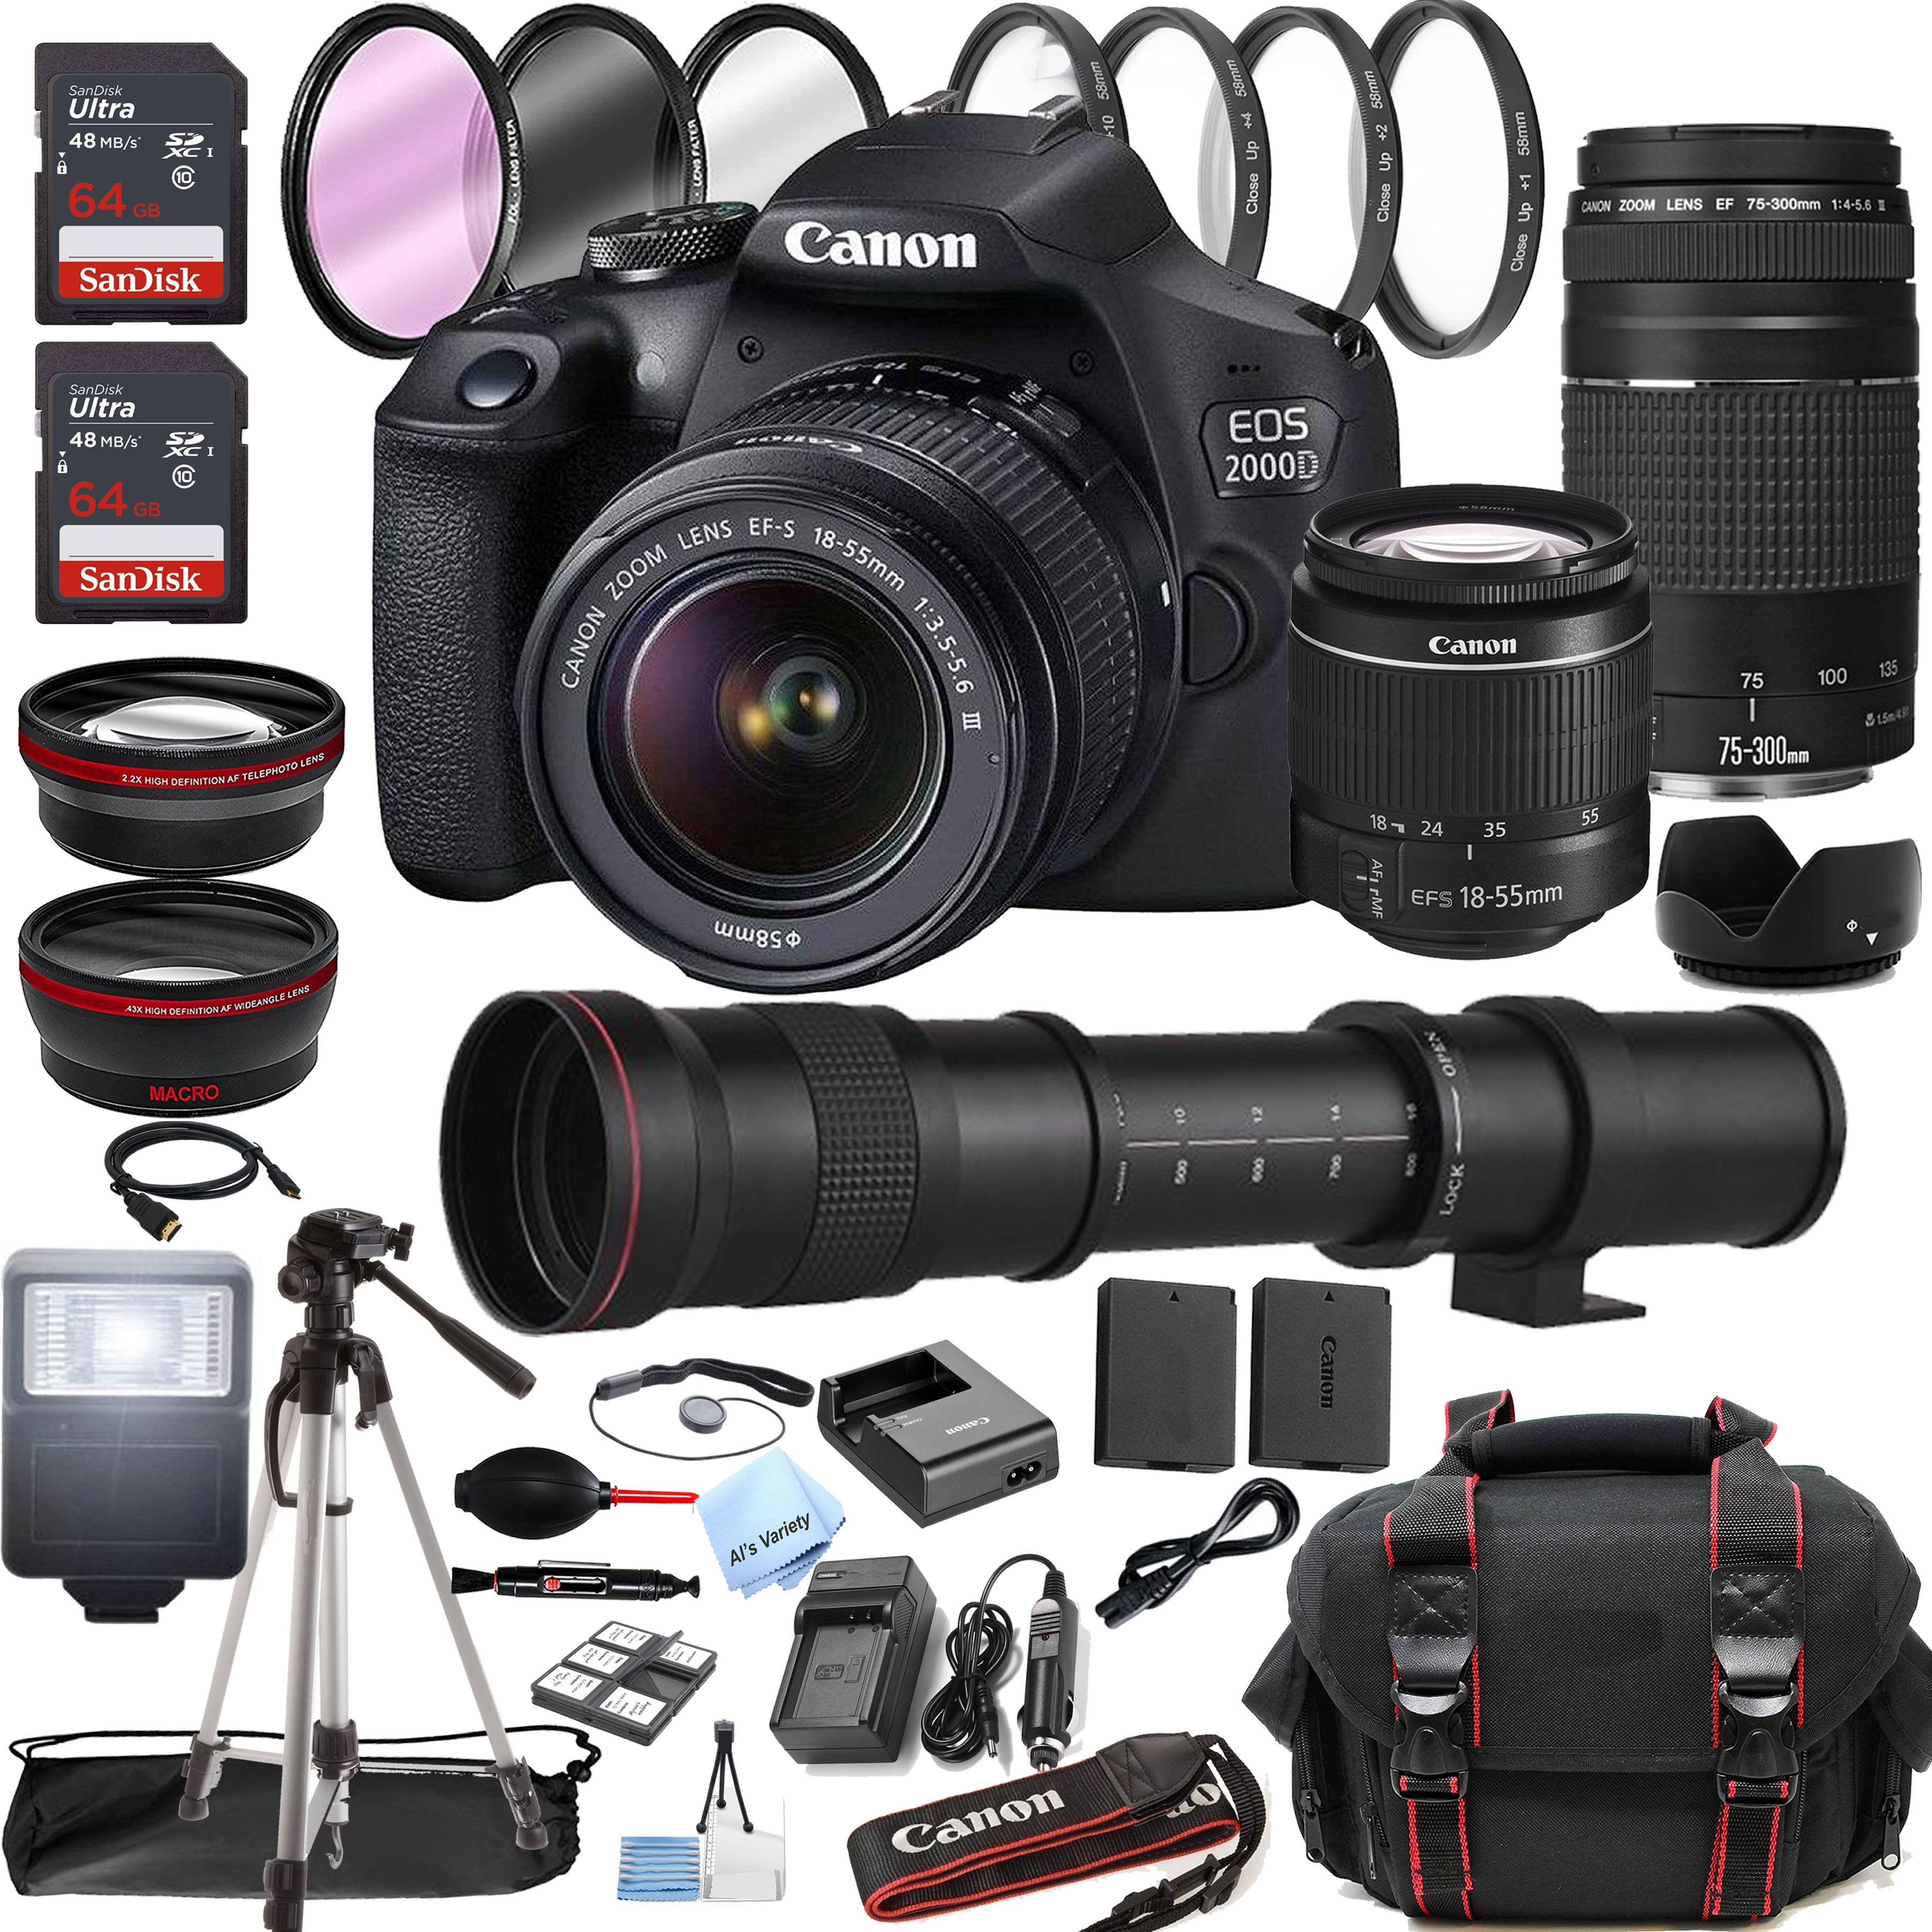 Canon EOS 2000D / Rebel T7 Digital SLR Camera 24.1MP with 18-55mm Zoom Lens  + ZeeTech Accessory Bundle, 2 Pack SanDisk 32GB Memory Card, Telephoto and  Wideangle Lenses, Flash, Tripod 